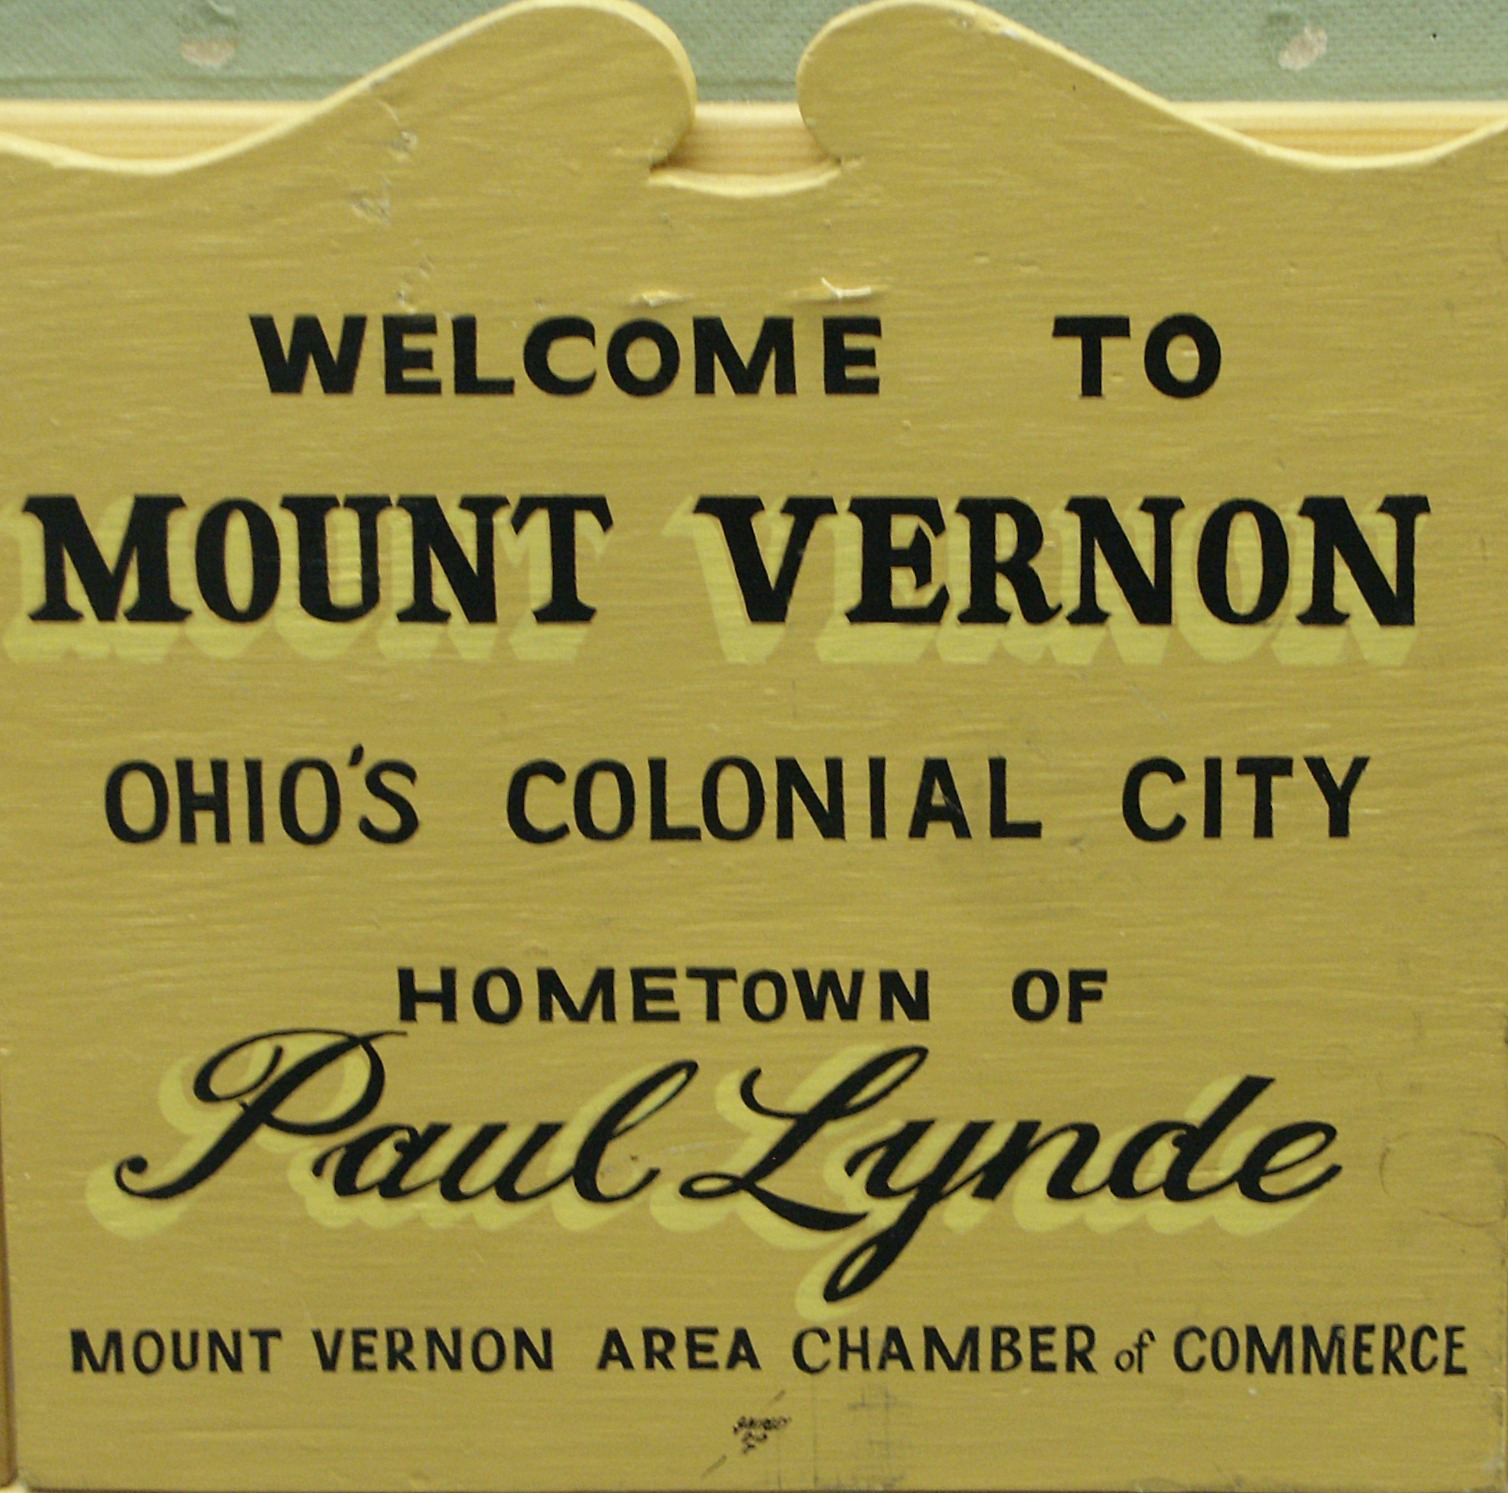 Paul Lynde signs at Mount Vernon city limits.